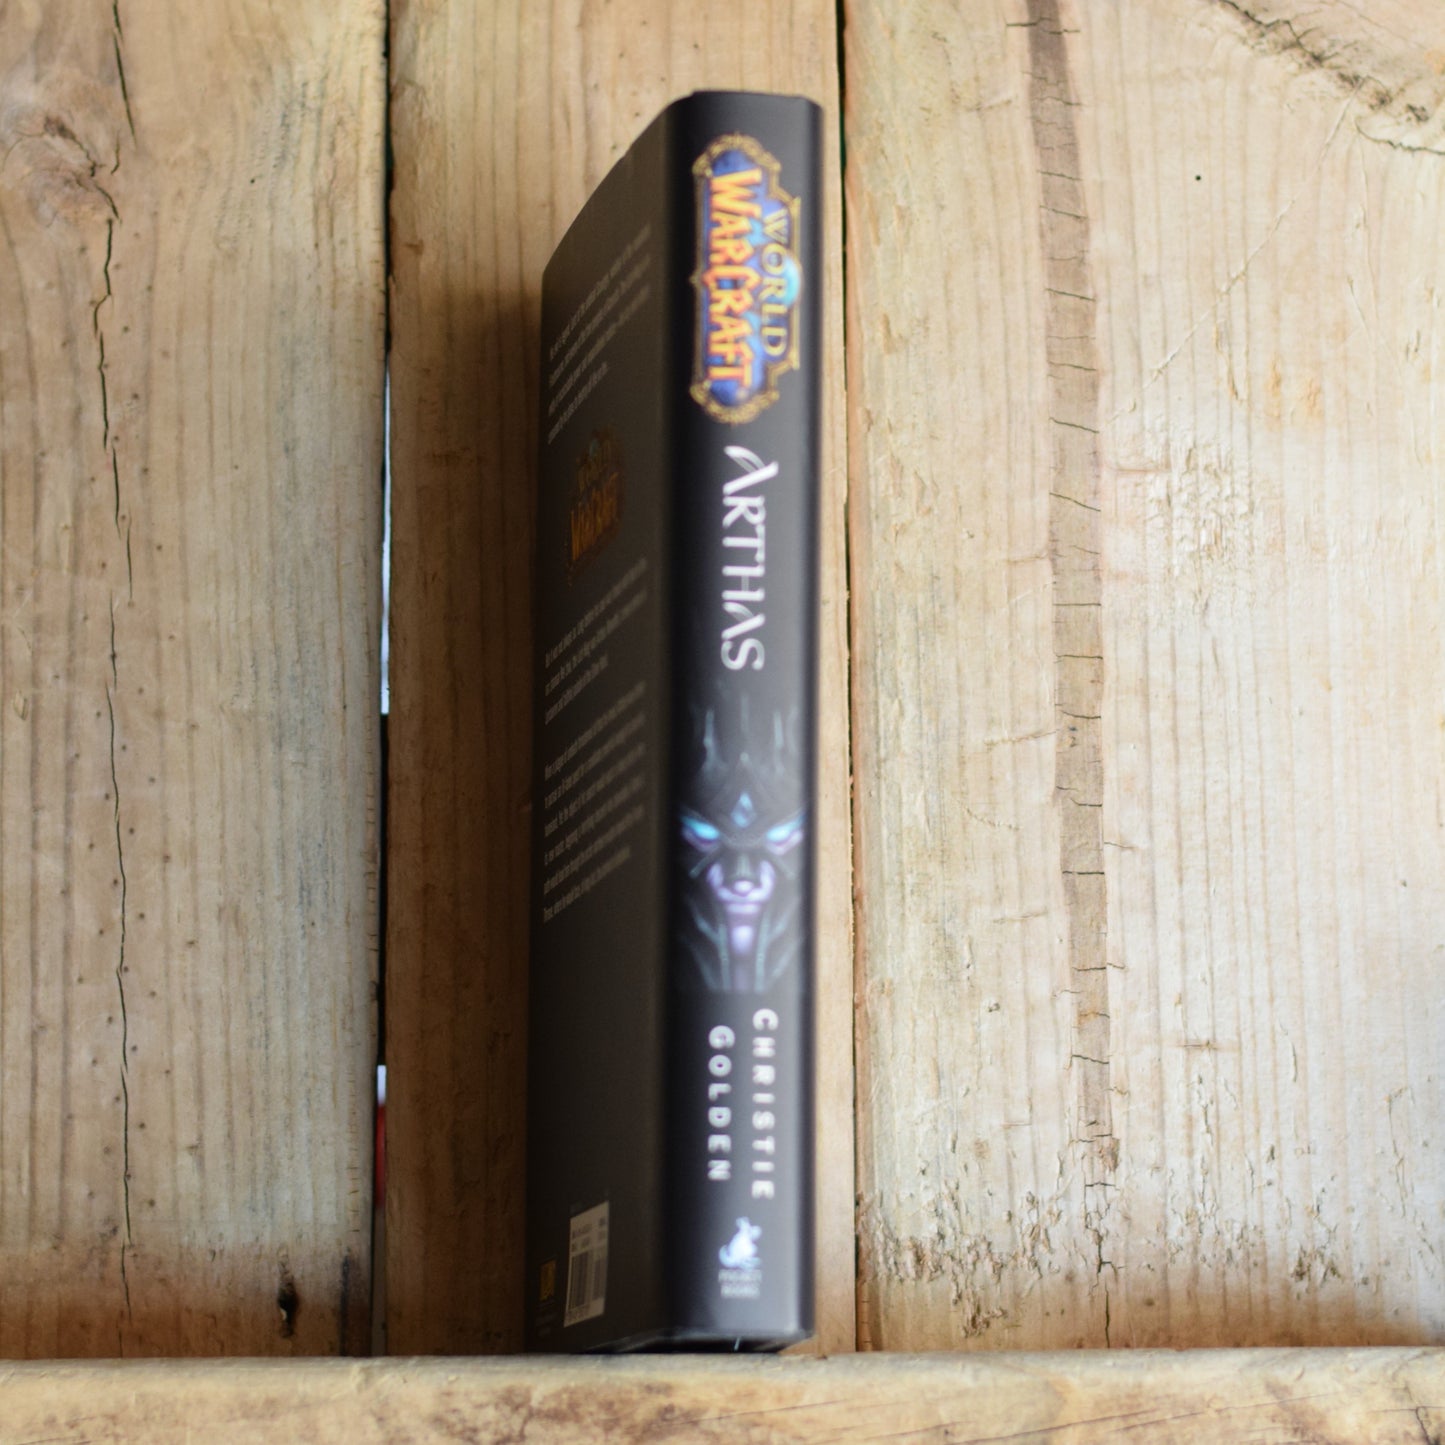 Fantasy Hardback: Christie Golden - World of Warcraft: Arthas, Rise of the Lich King SIGNED COLLECTOR'S EDITION